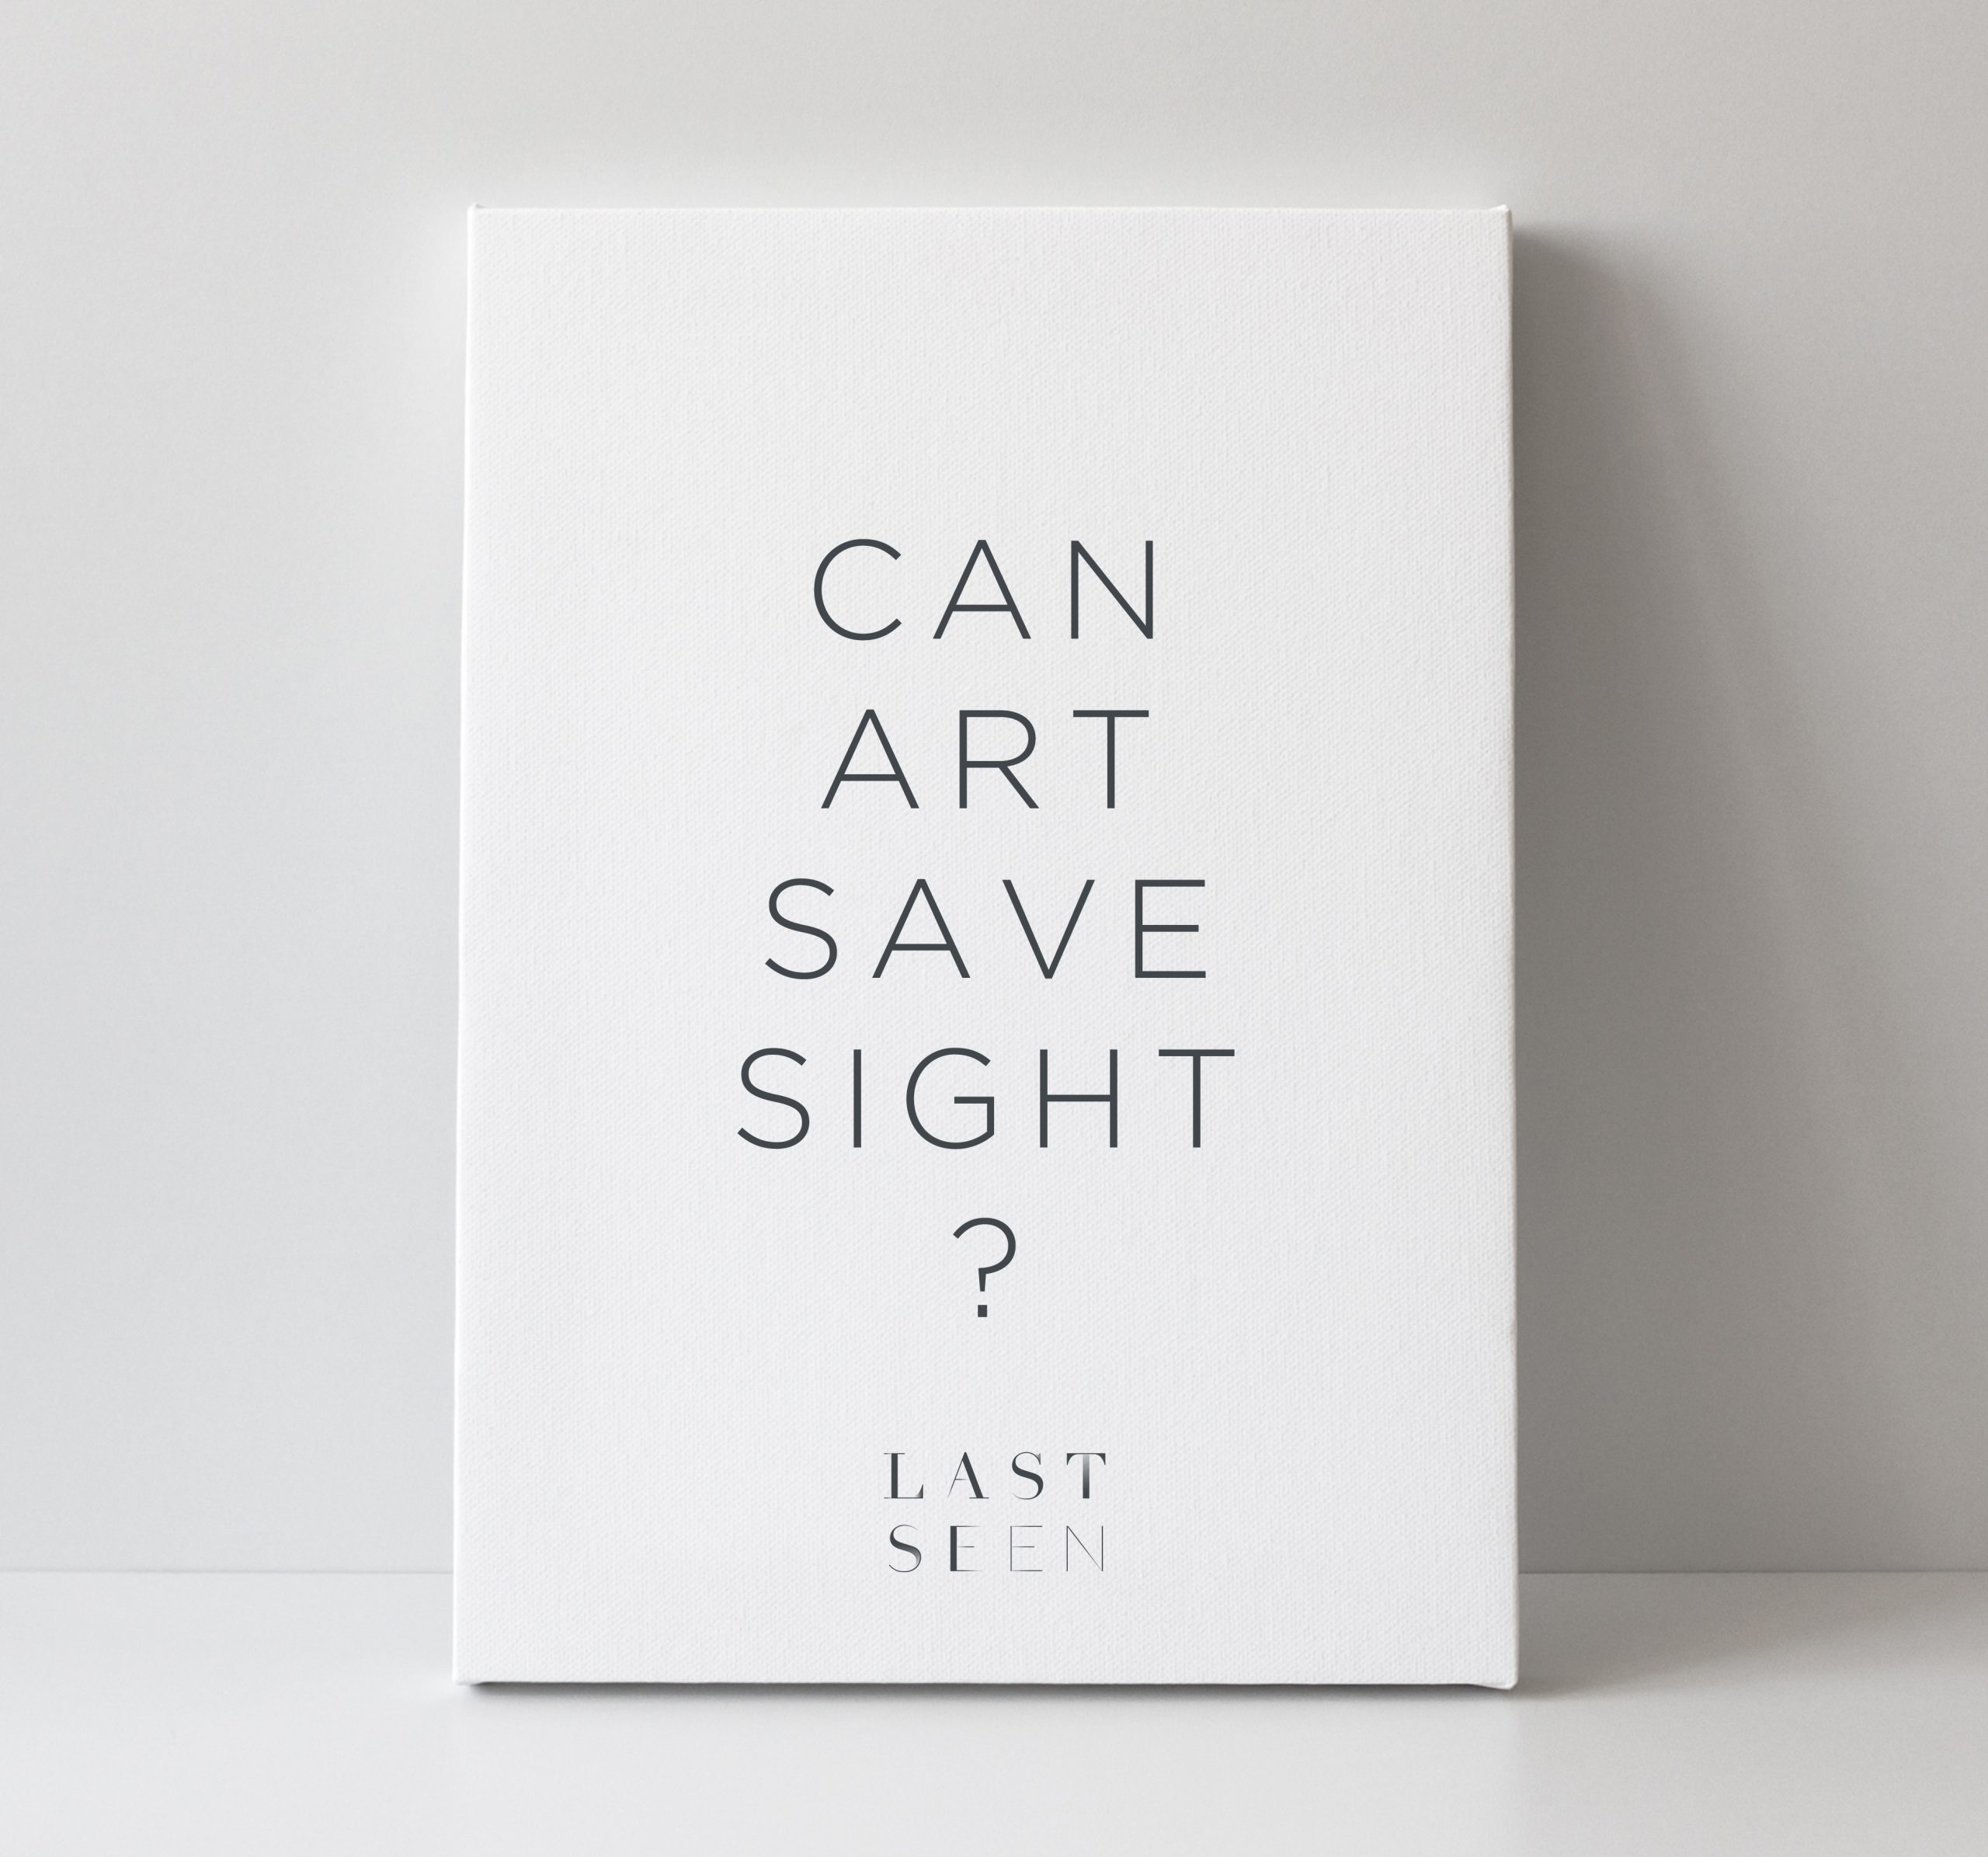 Last Seen: An Exhibition to Save Sight